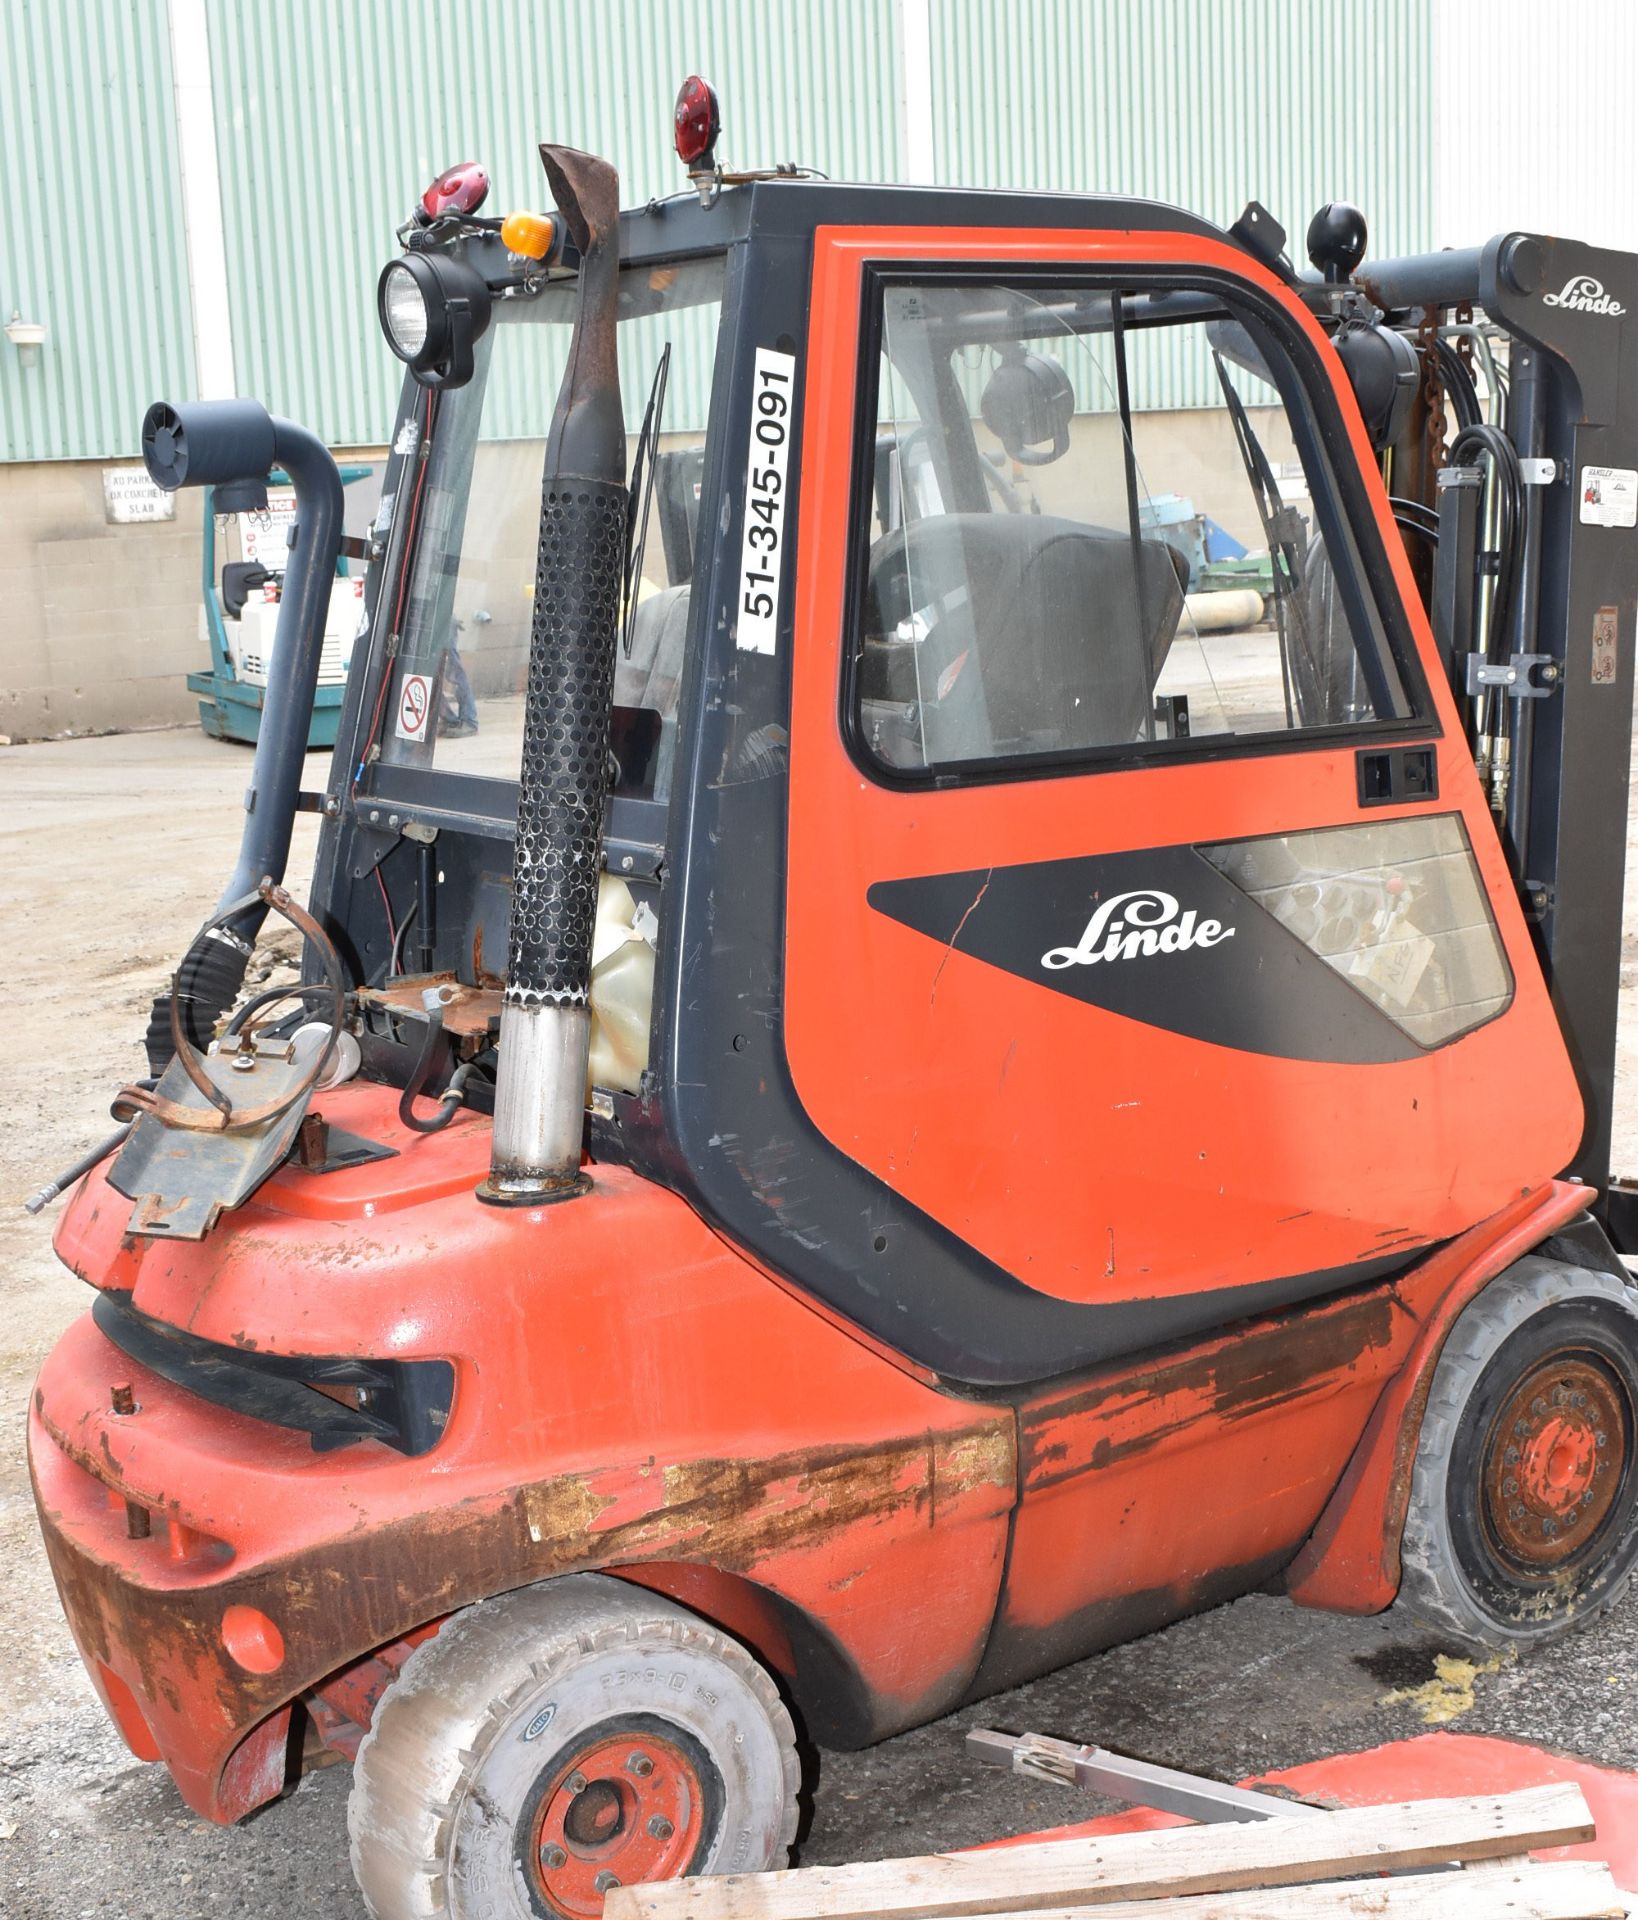 LINDE H25T 3,475 LB. CAPACITY LPG FORKLIFT WITH 183" MAX. LIFT HEIGHT, 2-STAGE MAST, MULTI-SURFACE - Image 3 of 8